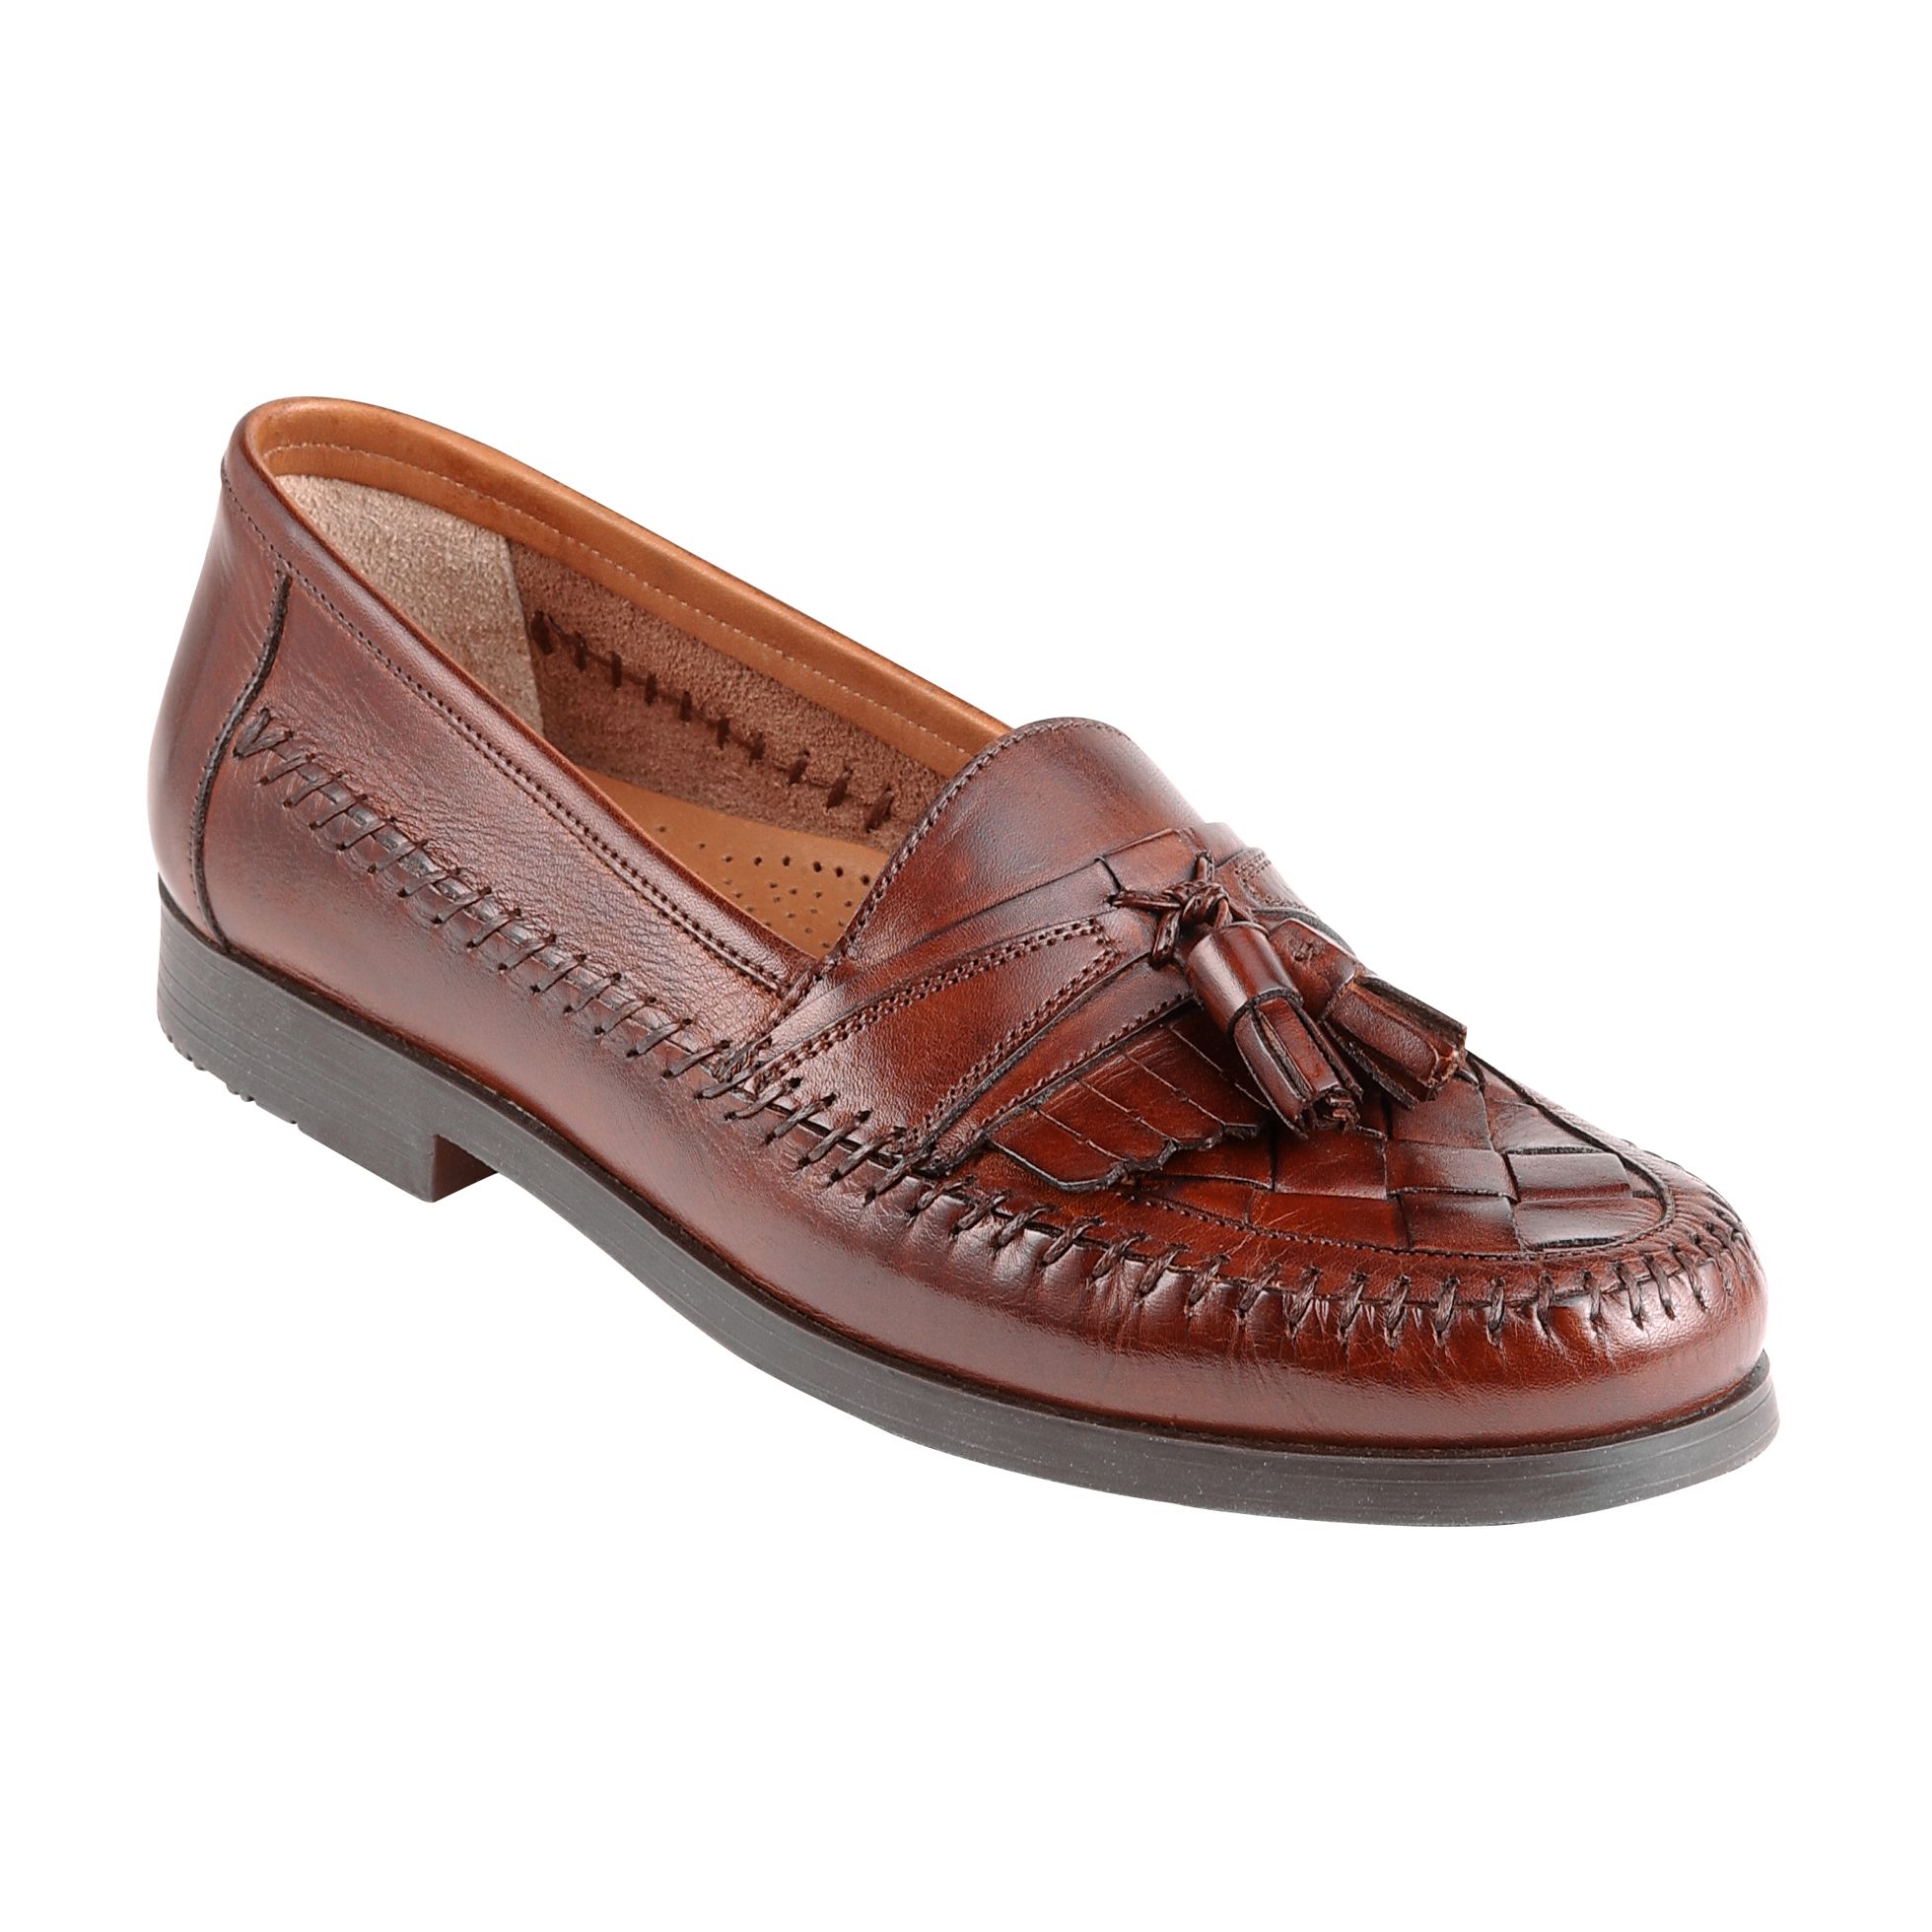 Shop for Giorgio Brutini Men's Dress Shoes in the Clothing, Shoes ...